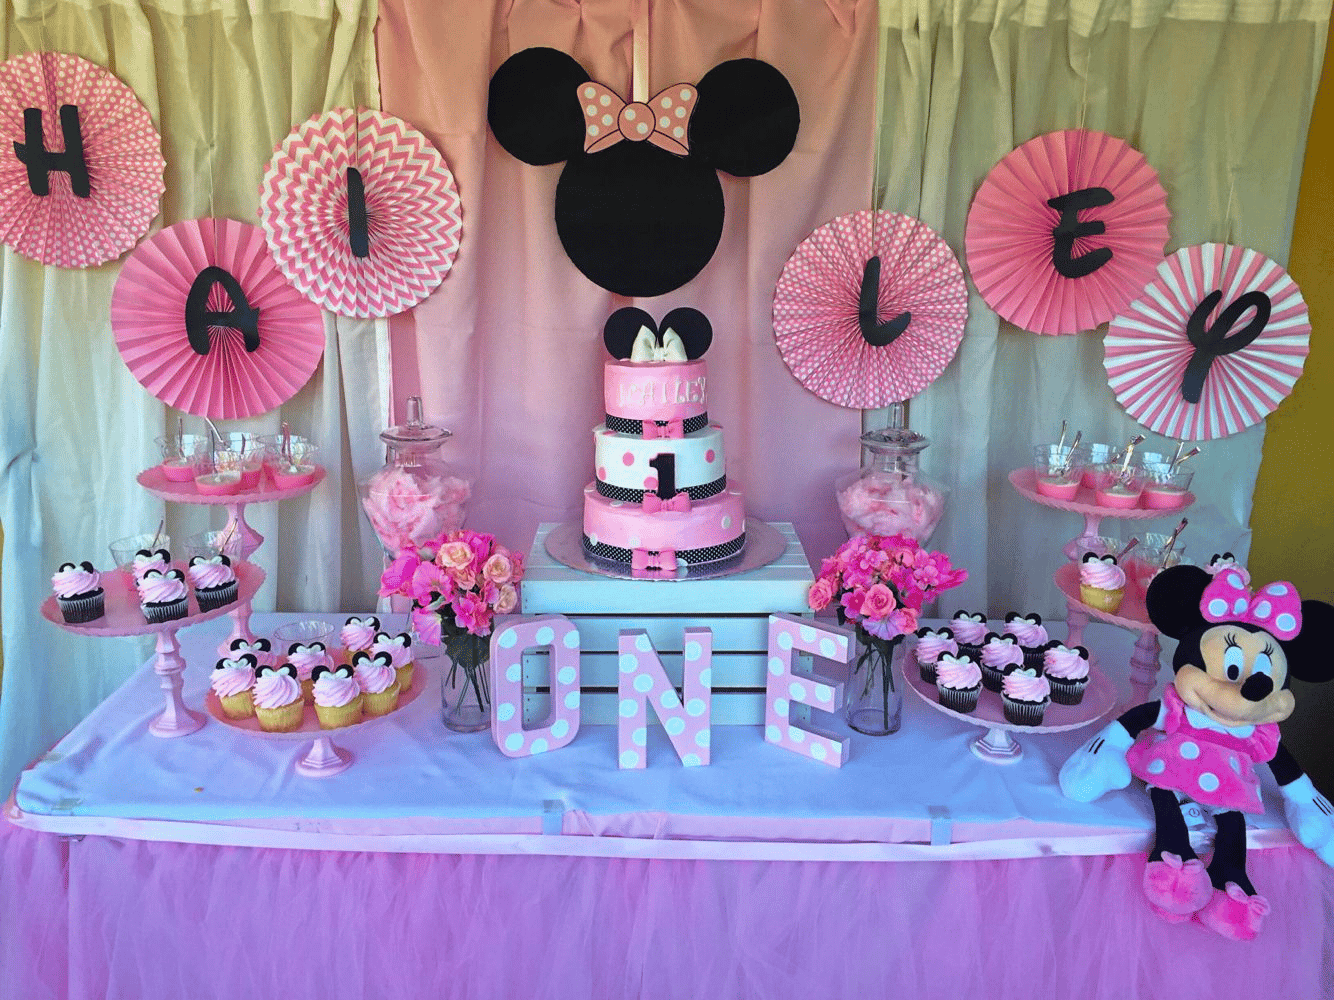 Simple Minnie-mouse-themed birthday party decor